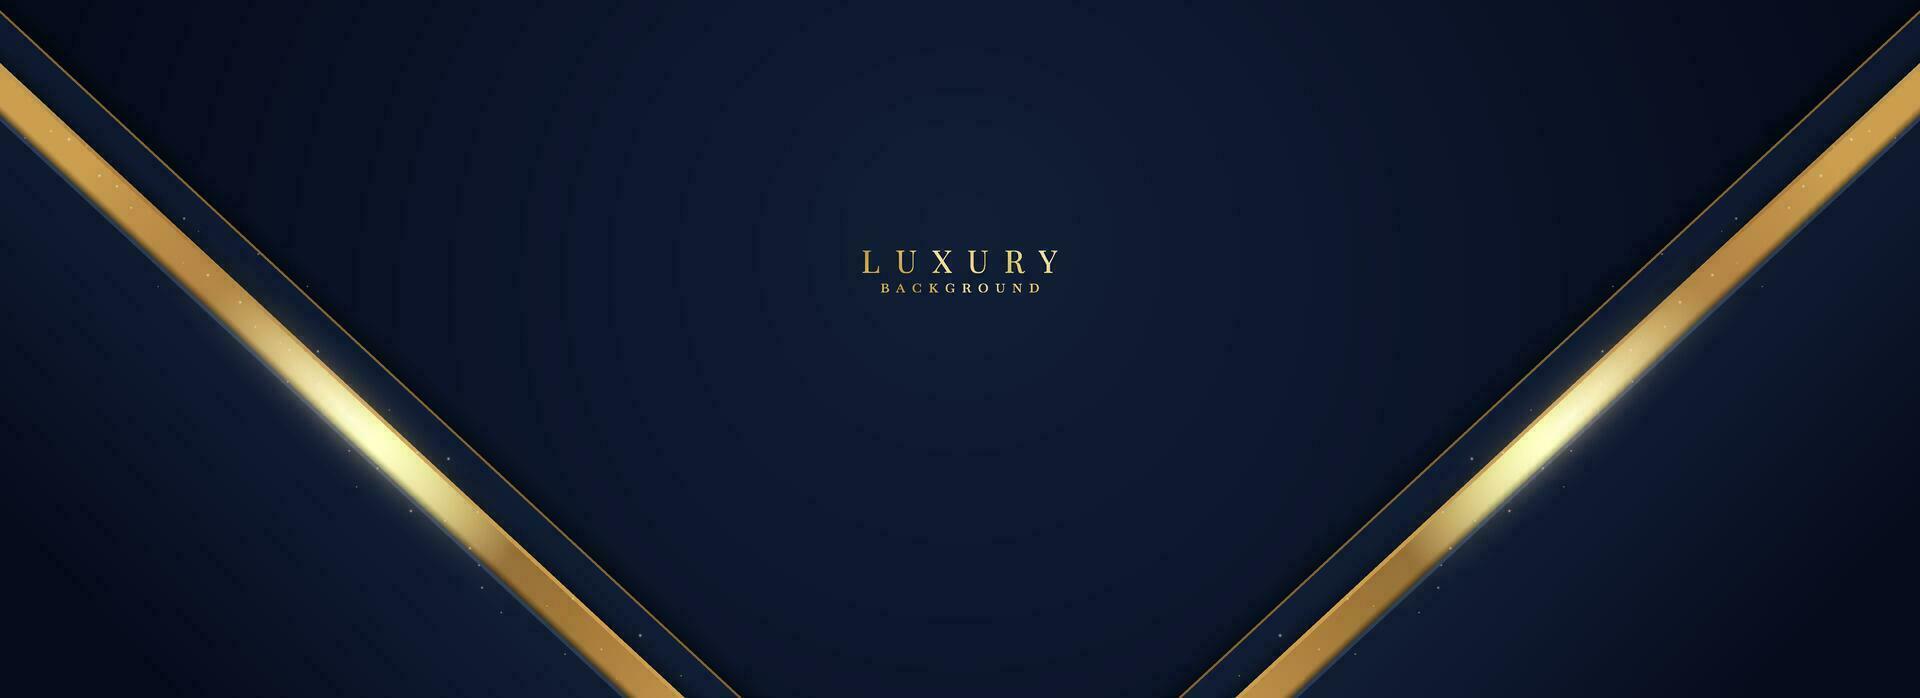 Luxury and elegant vector background illustration, business premium banner for gold and silver